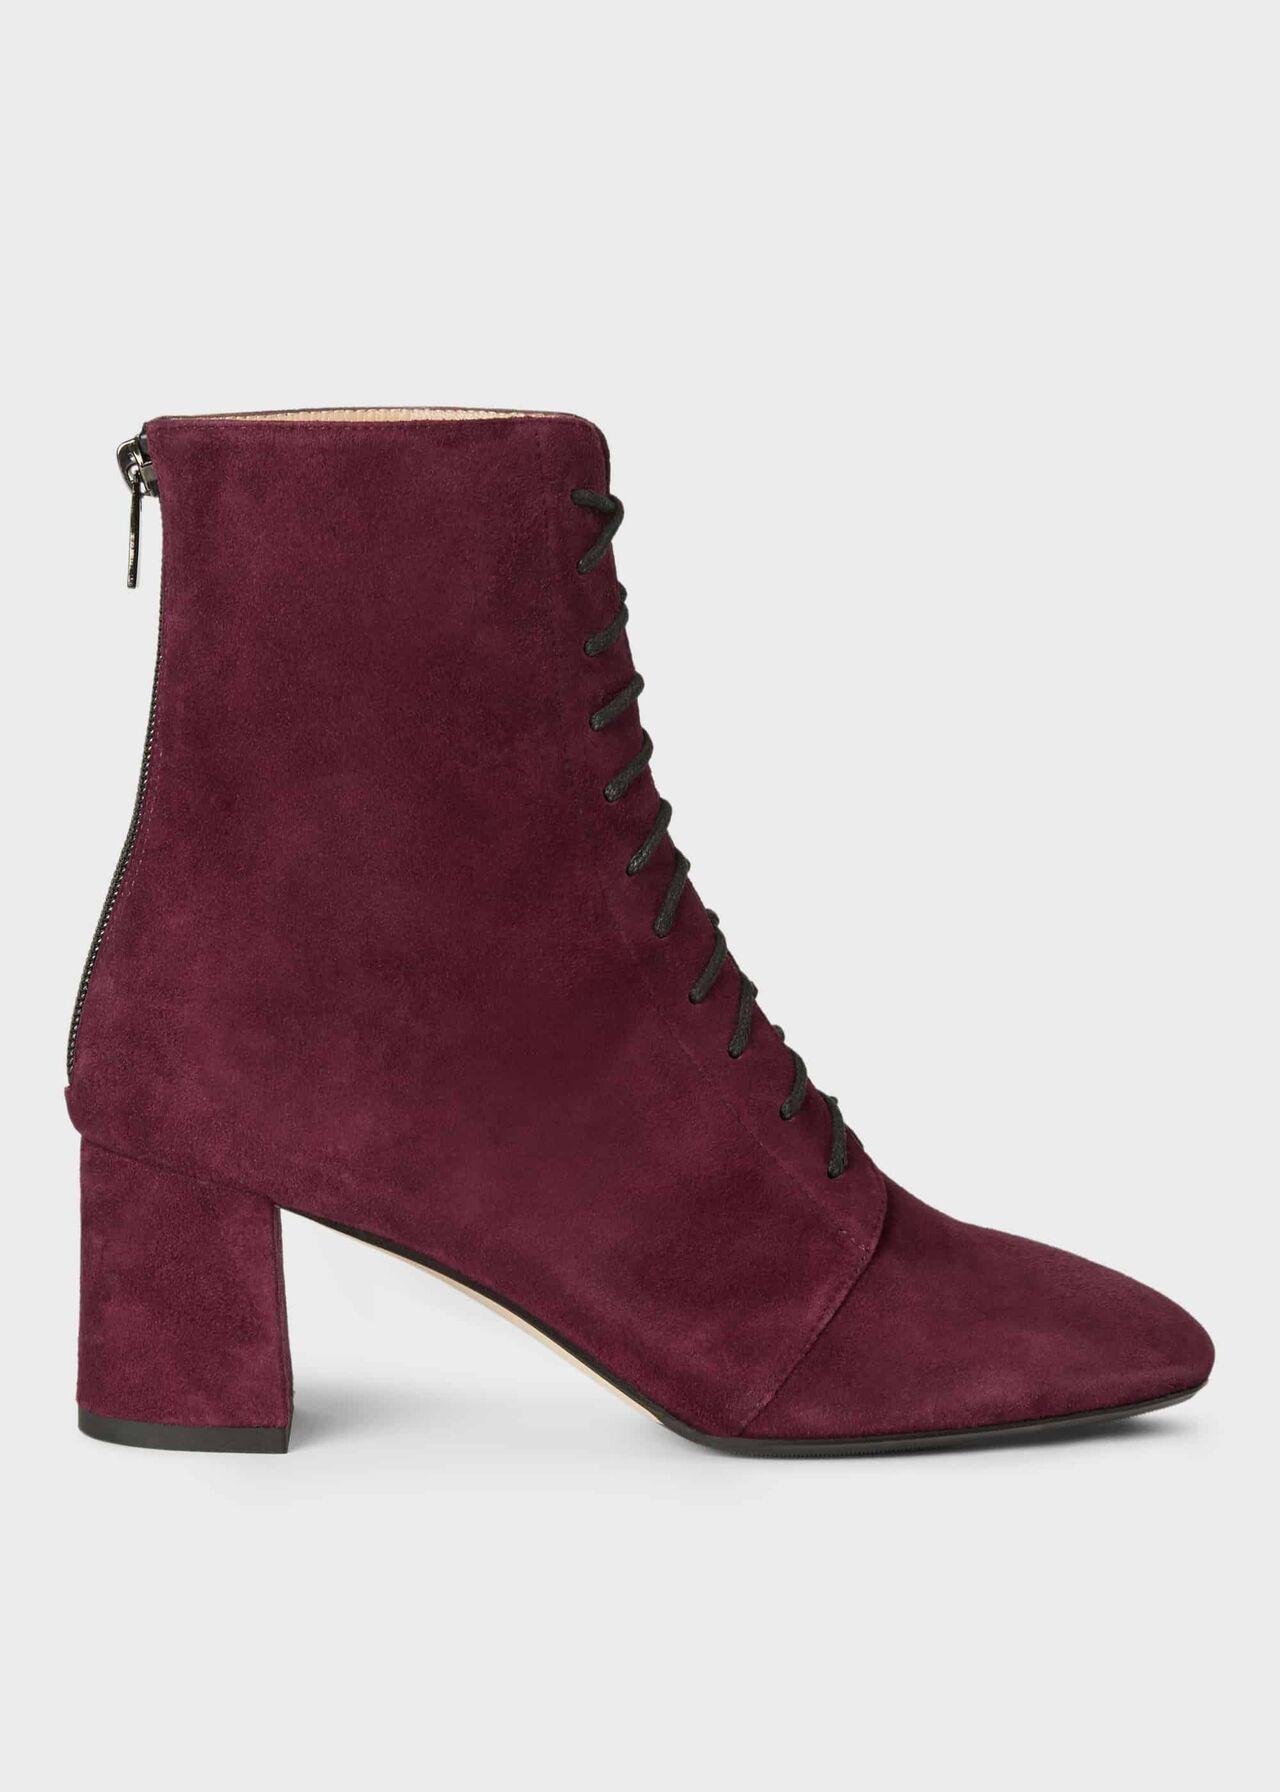 Hobbs Suede Imogen Lace Up Boot in Burgundy (Purple) - Lyst